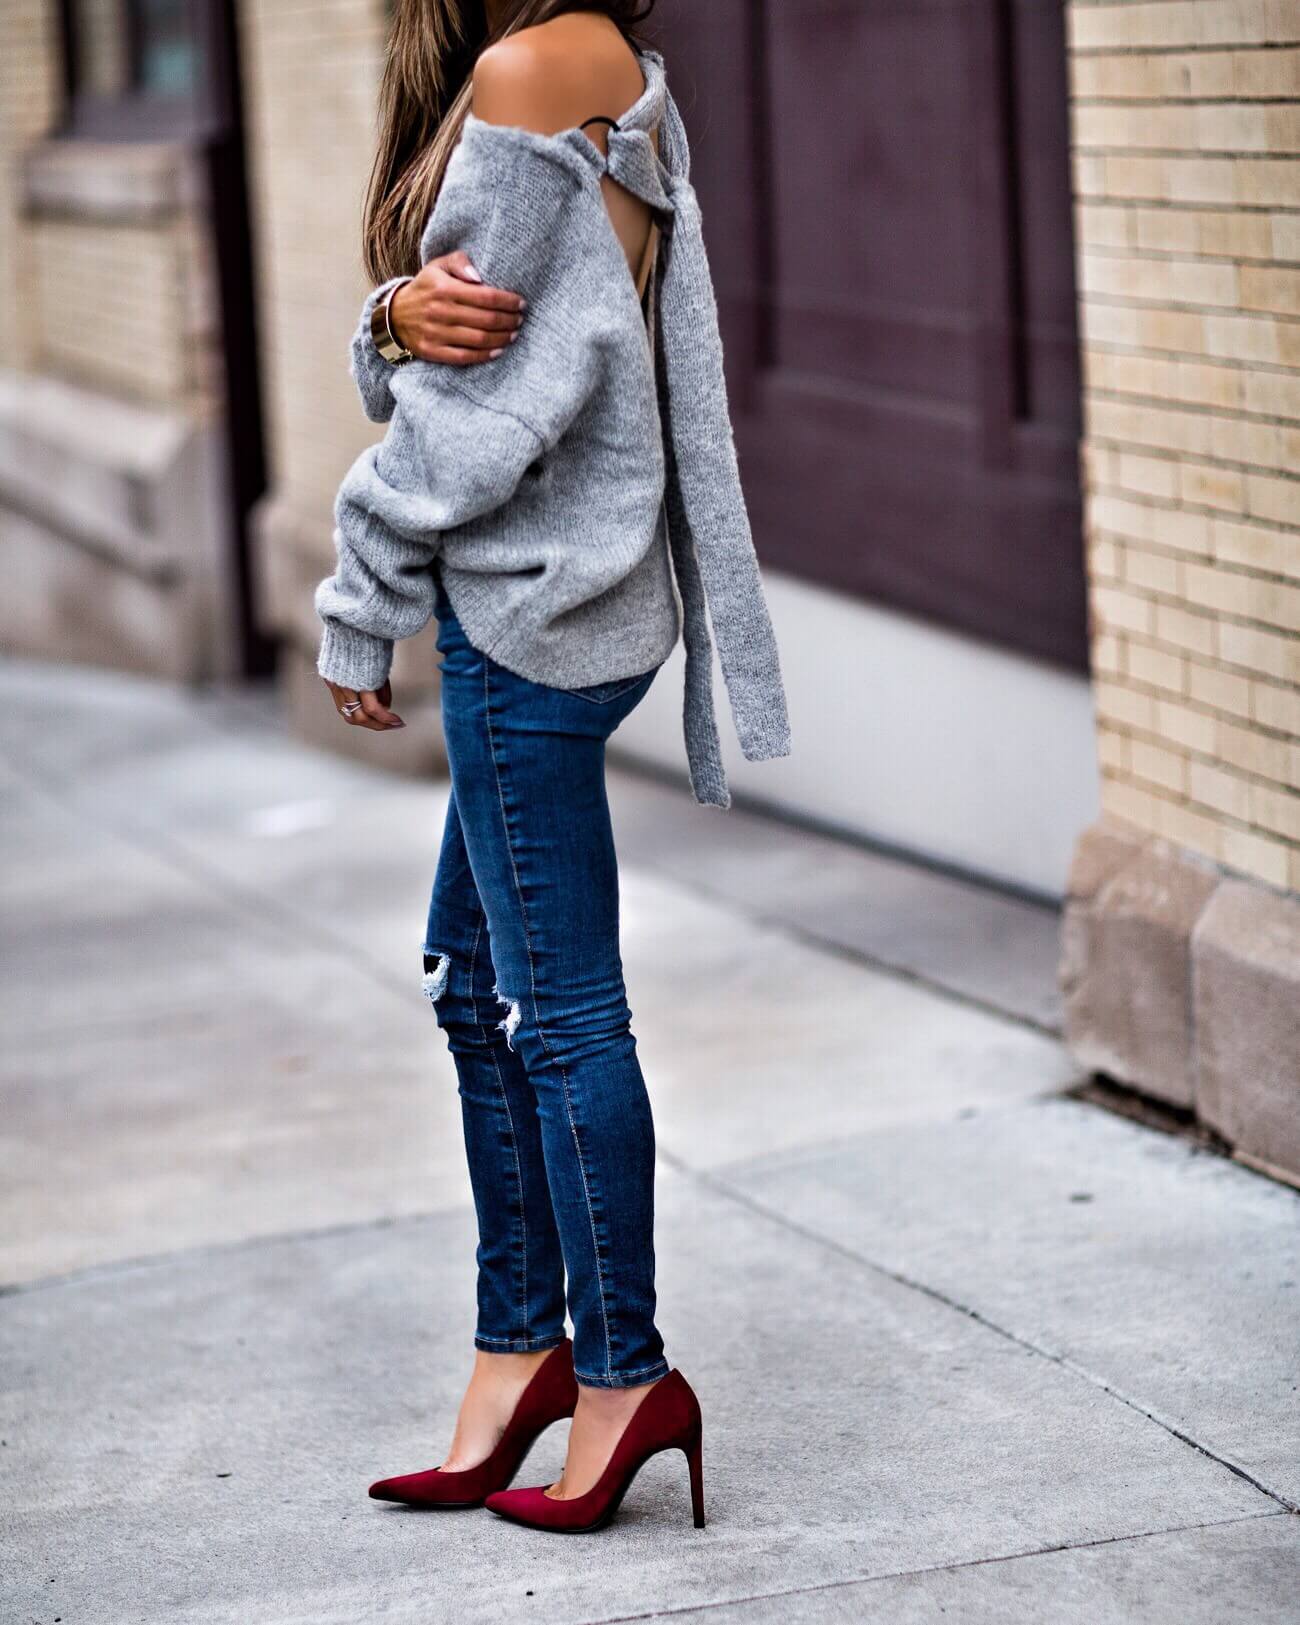 fashion blogger mia mia mine wearing red heels and an open back sweater from elevtd